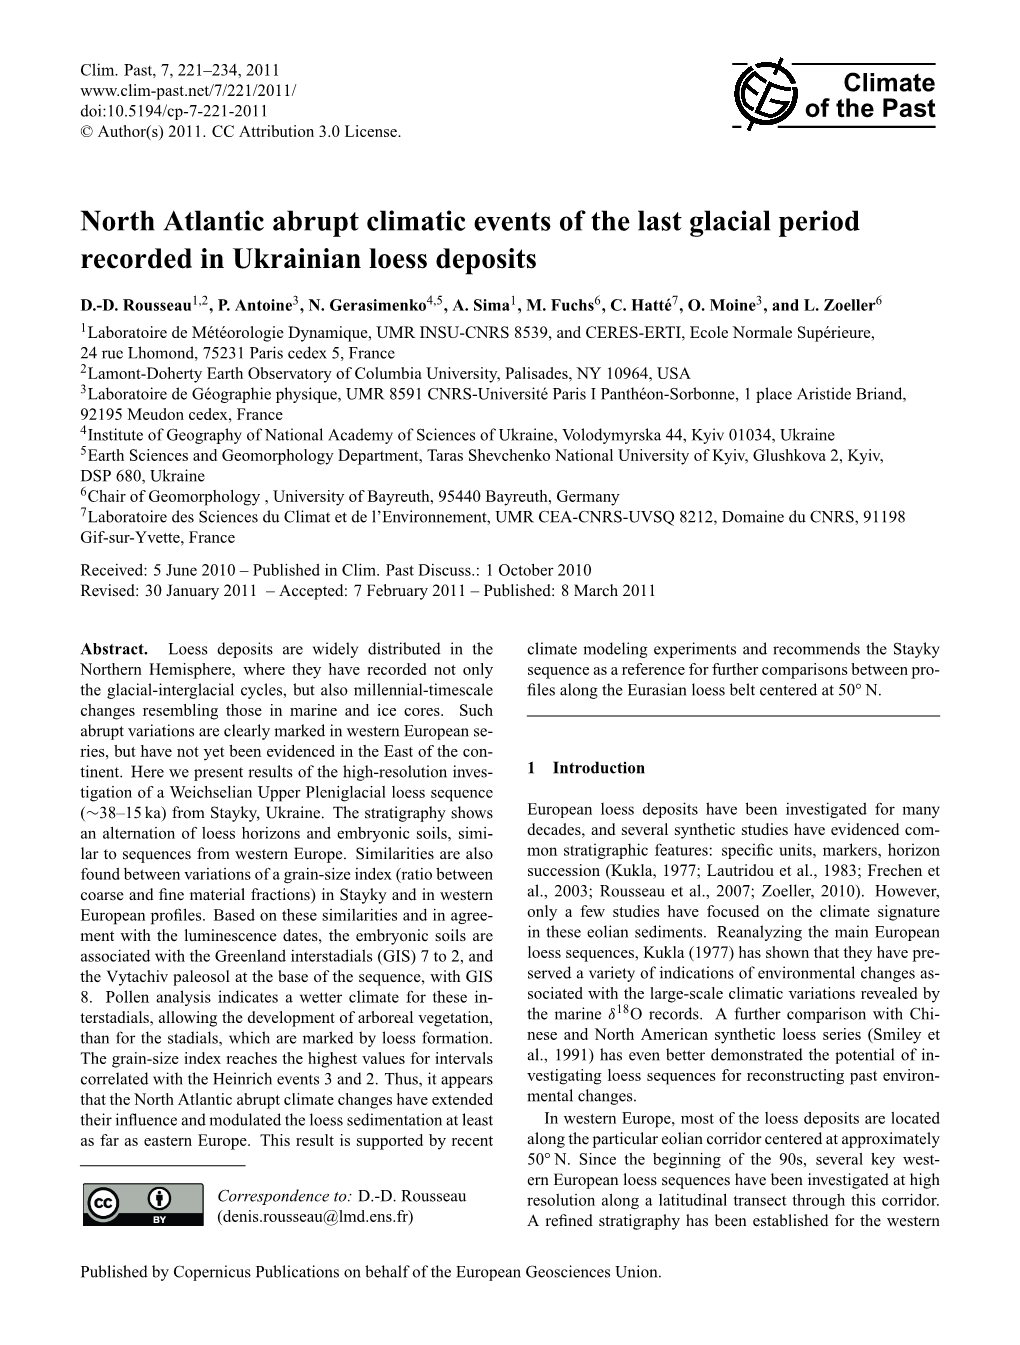 North Atlantic Abrupt Climatic Events of the Last Glacial Period Recorded in Ukrainian Loess Deposits